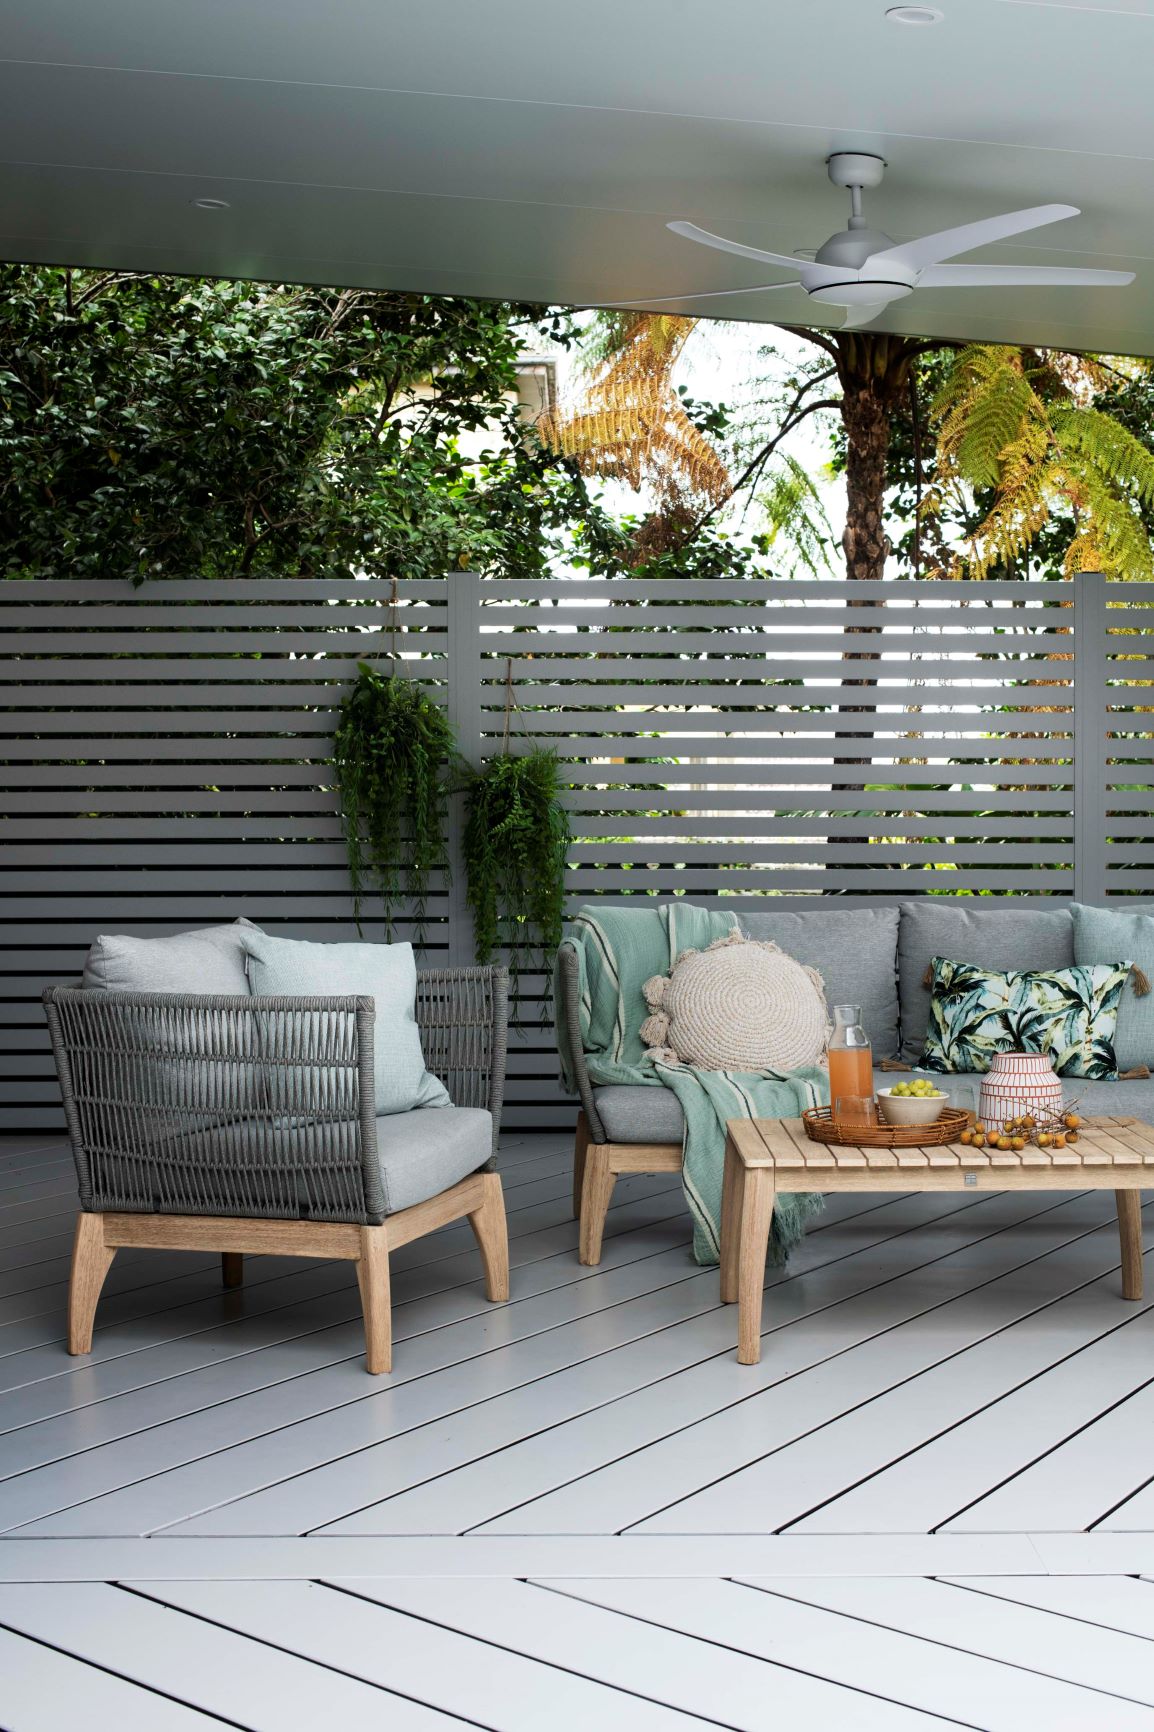 How to create the perfect outdoor space